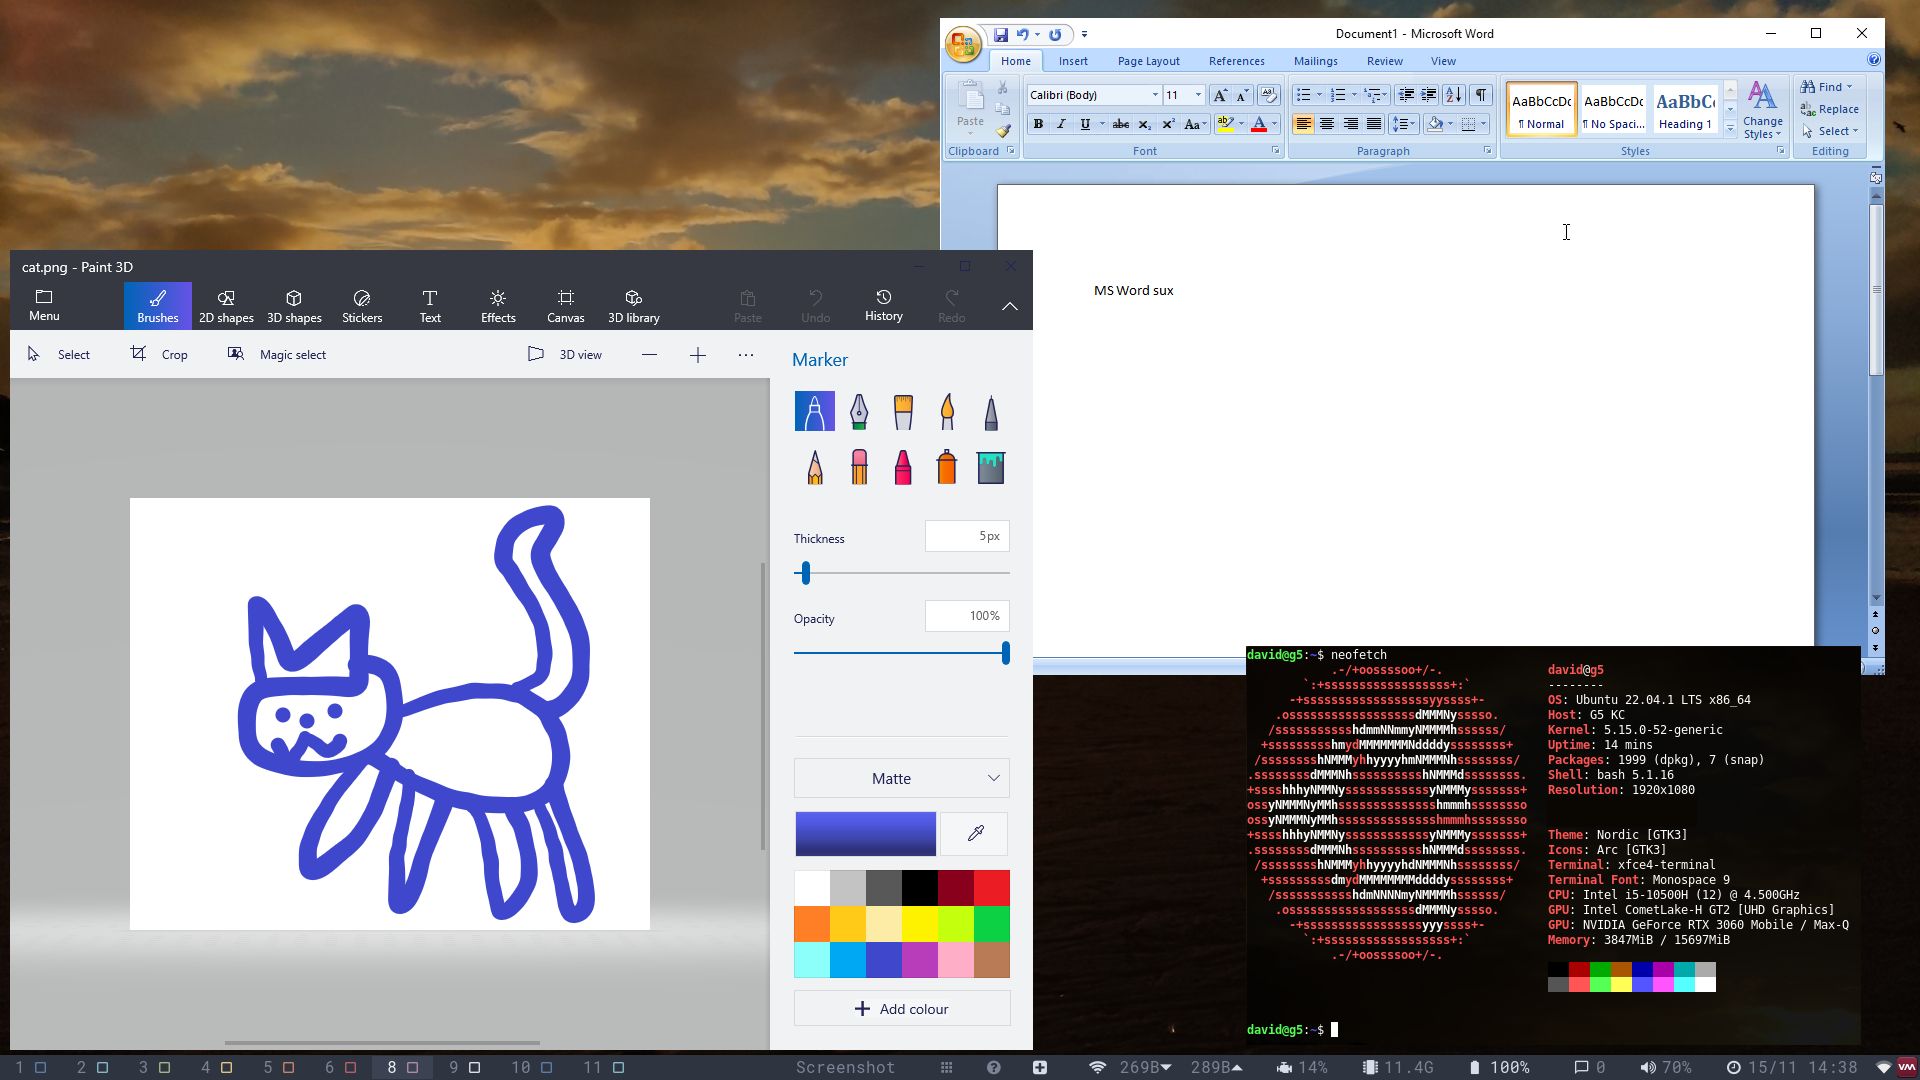 winapps on linux including word 97 and Paint 3D - with a bad picture of a cat